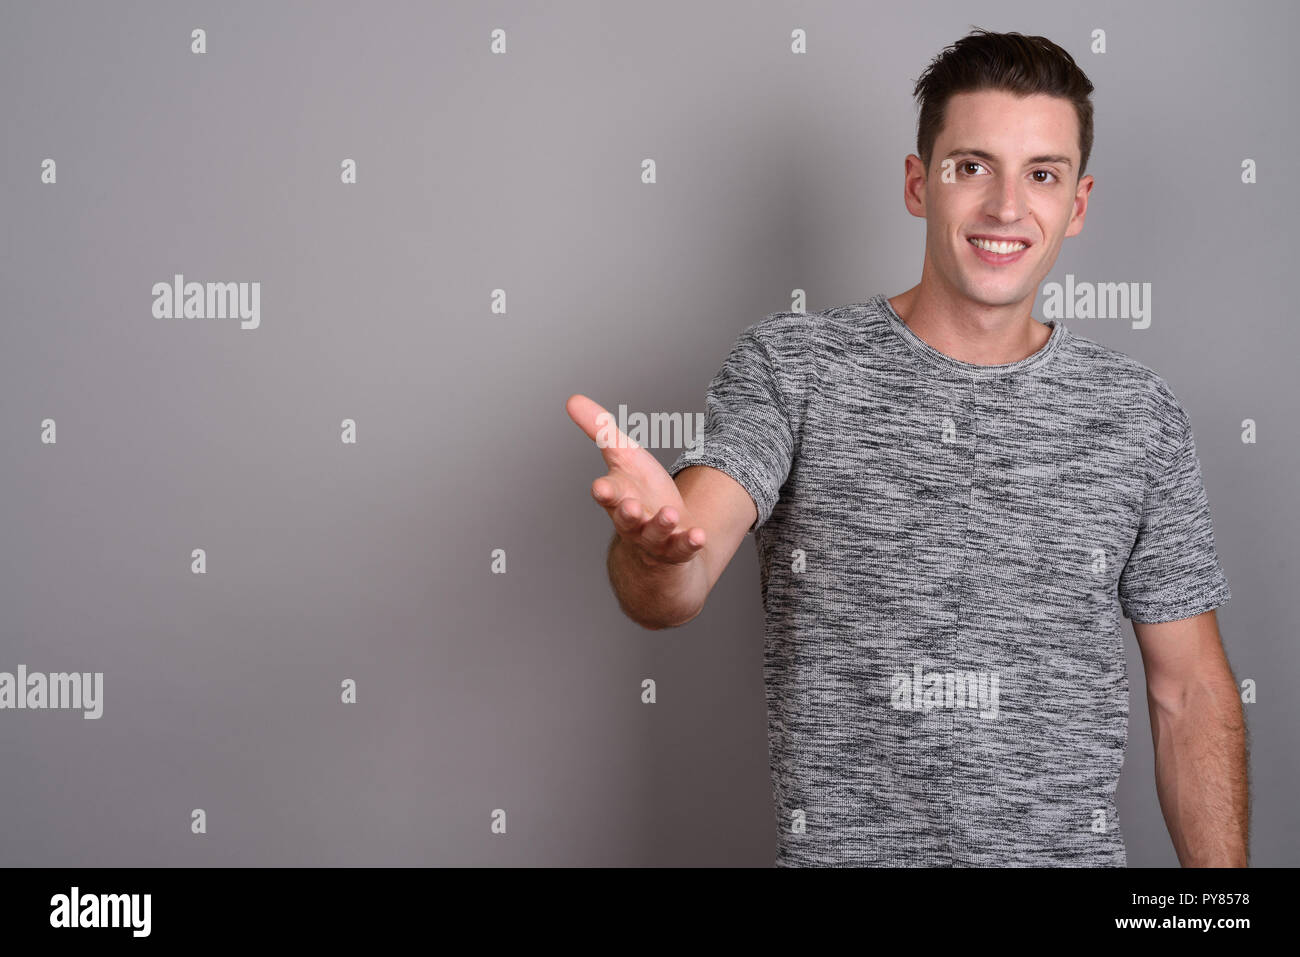 Young handsome man wearing gray shirt against gray background Stock Photo